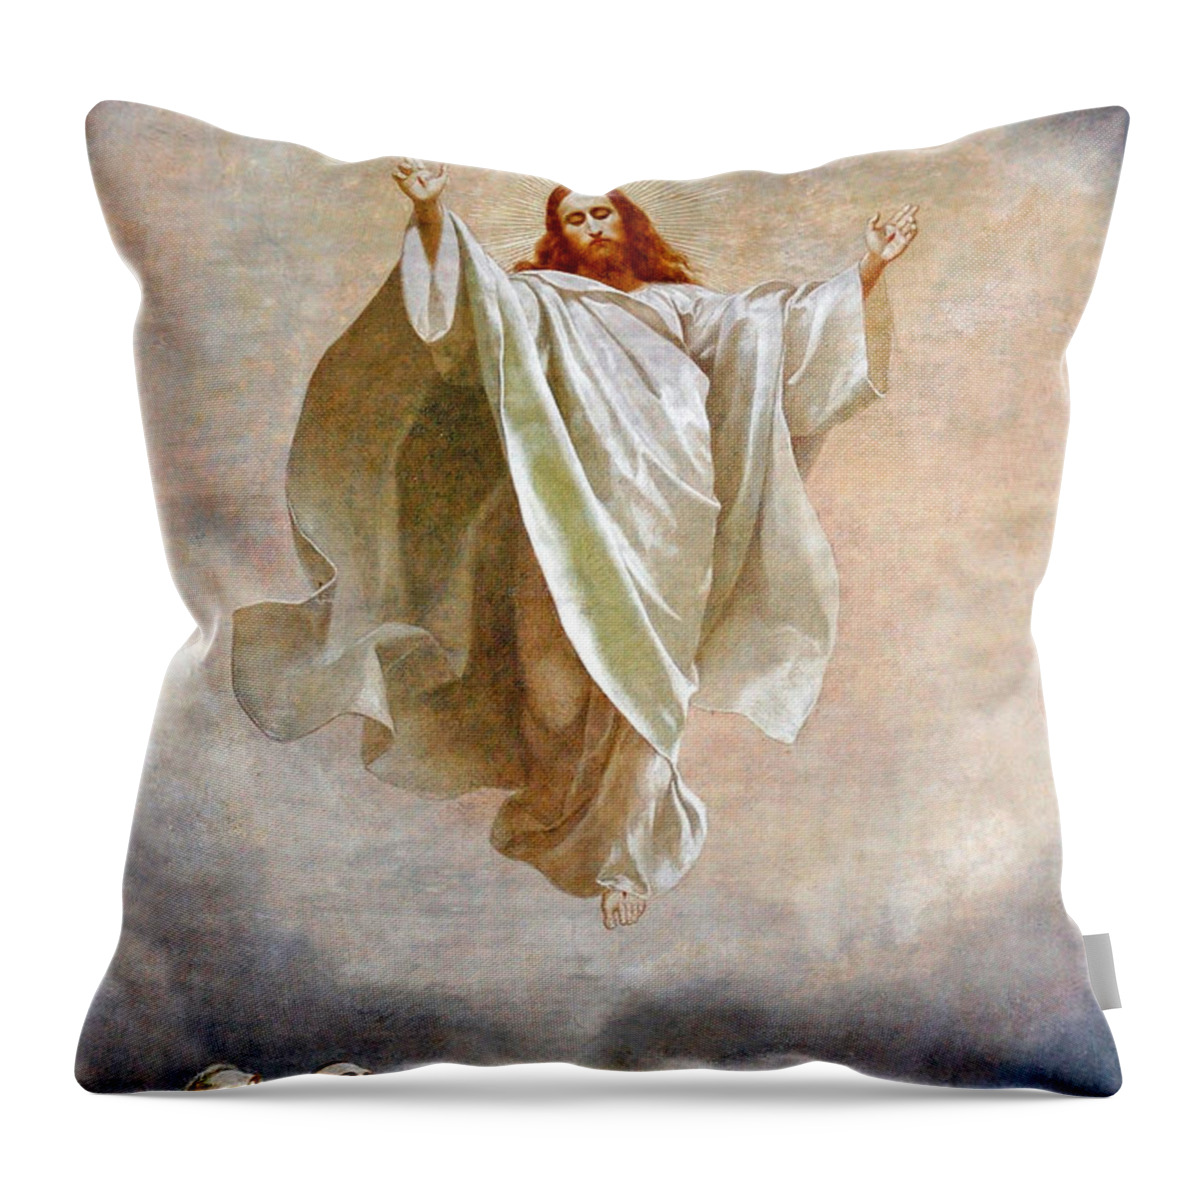 Ascension To Heaven Throw Pillow featuring the painting Ascension to Heaven by Munir Alawi